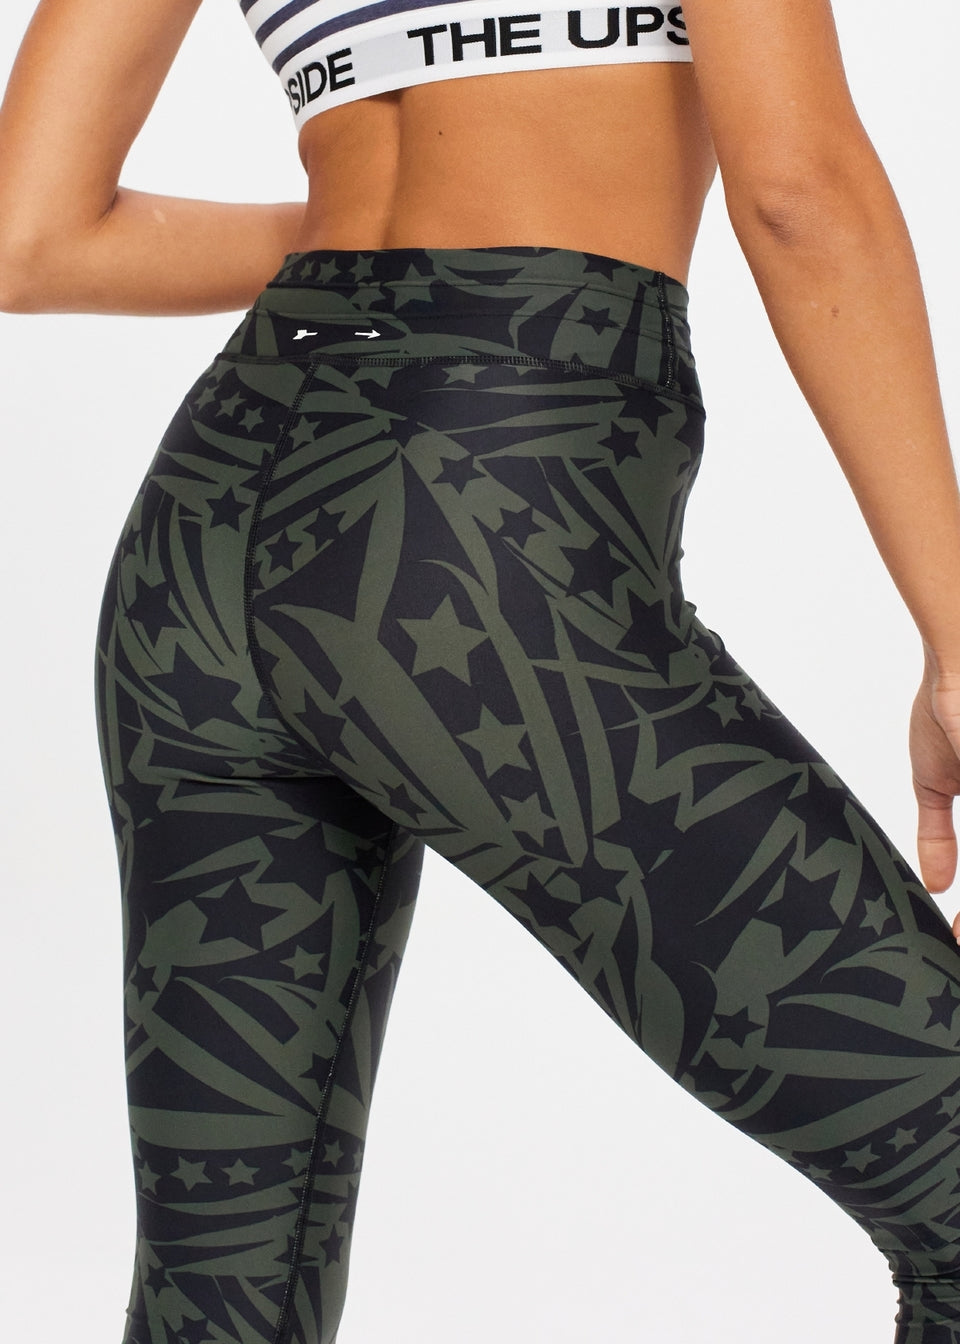 Palm Etoile Yoga Pant in Abstract